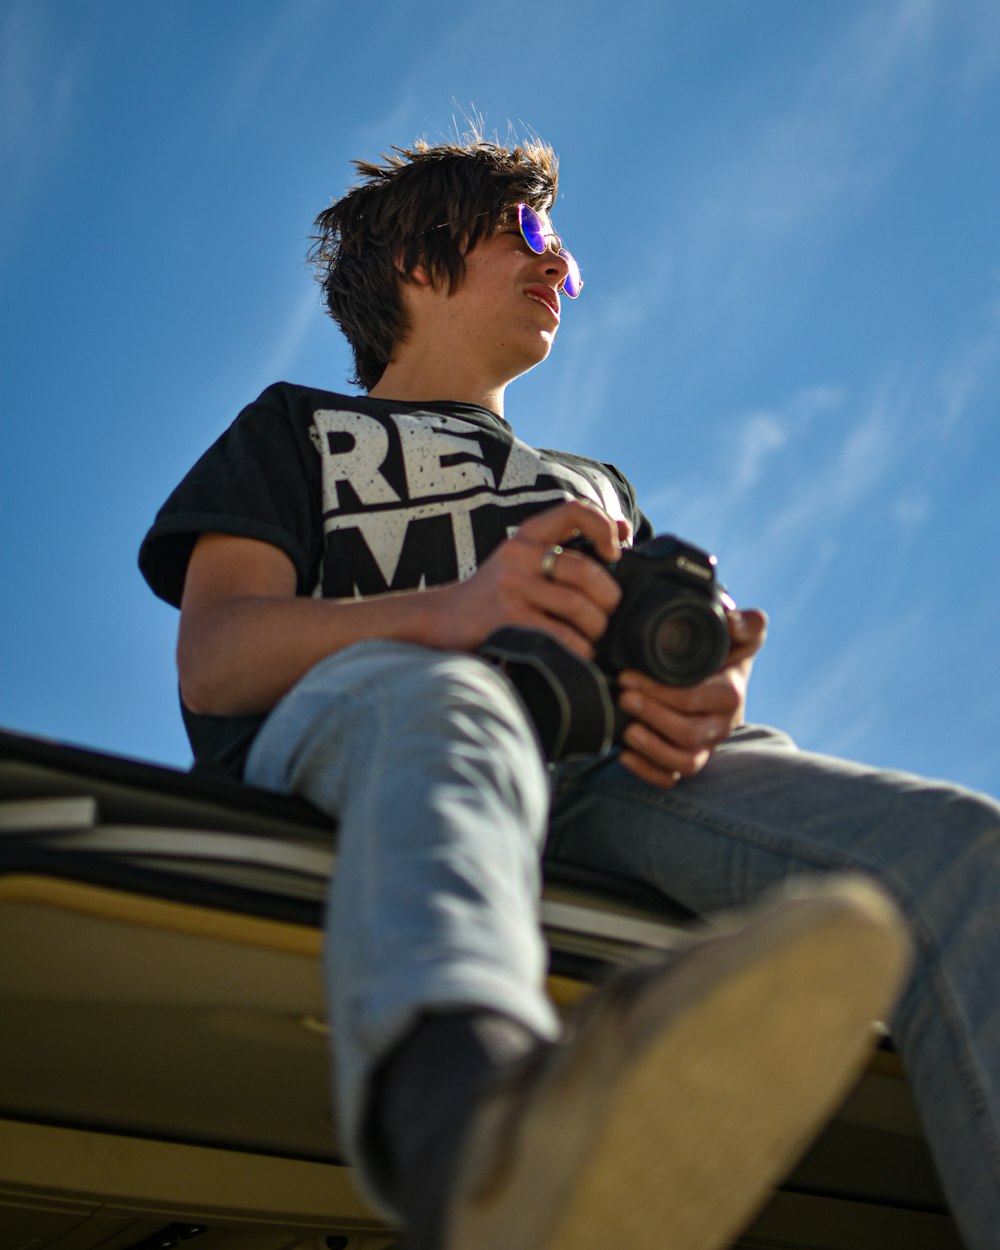 a man sitting on top of a roof holding a camera